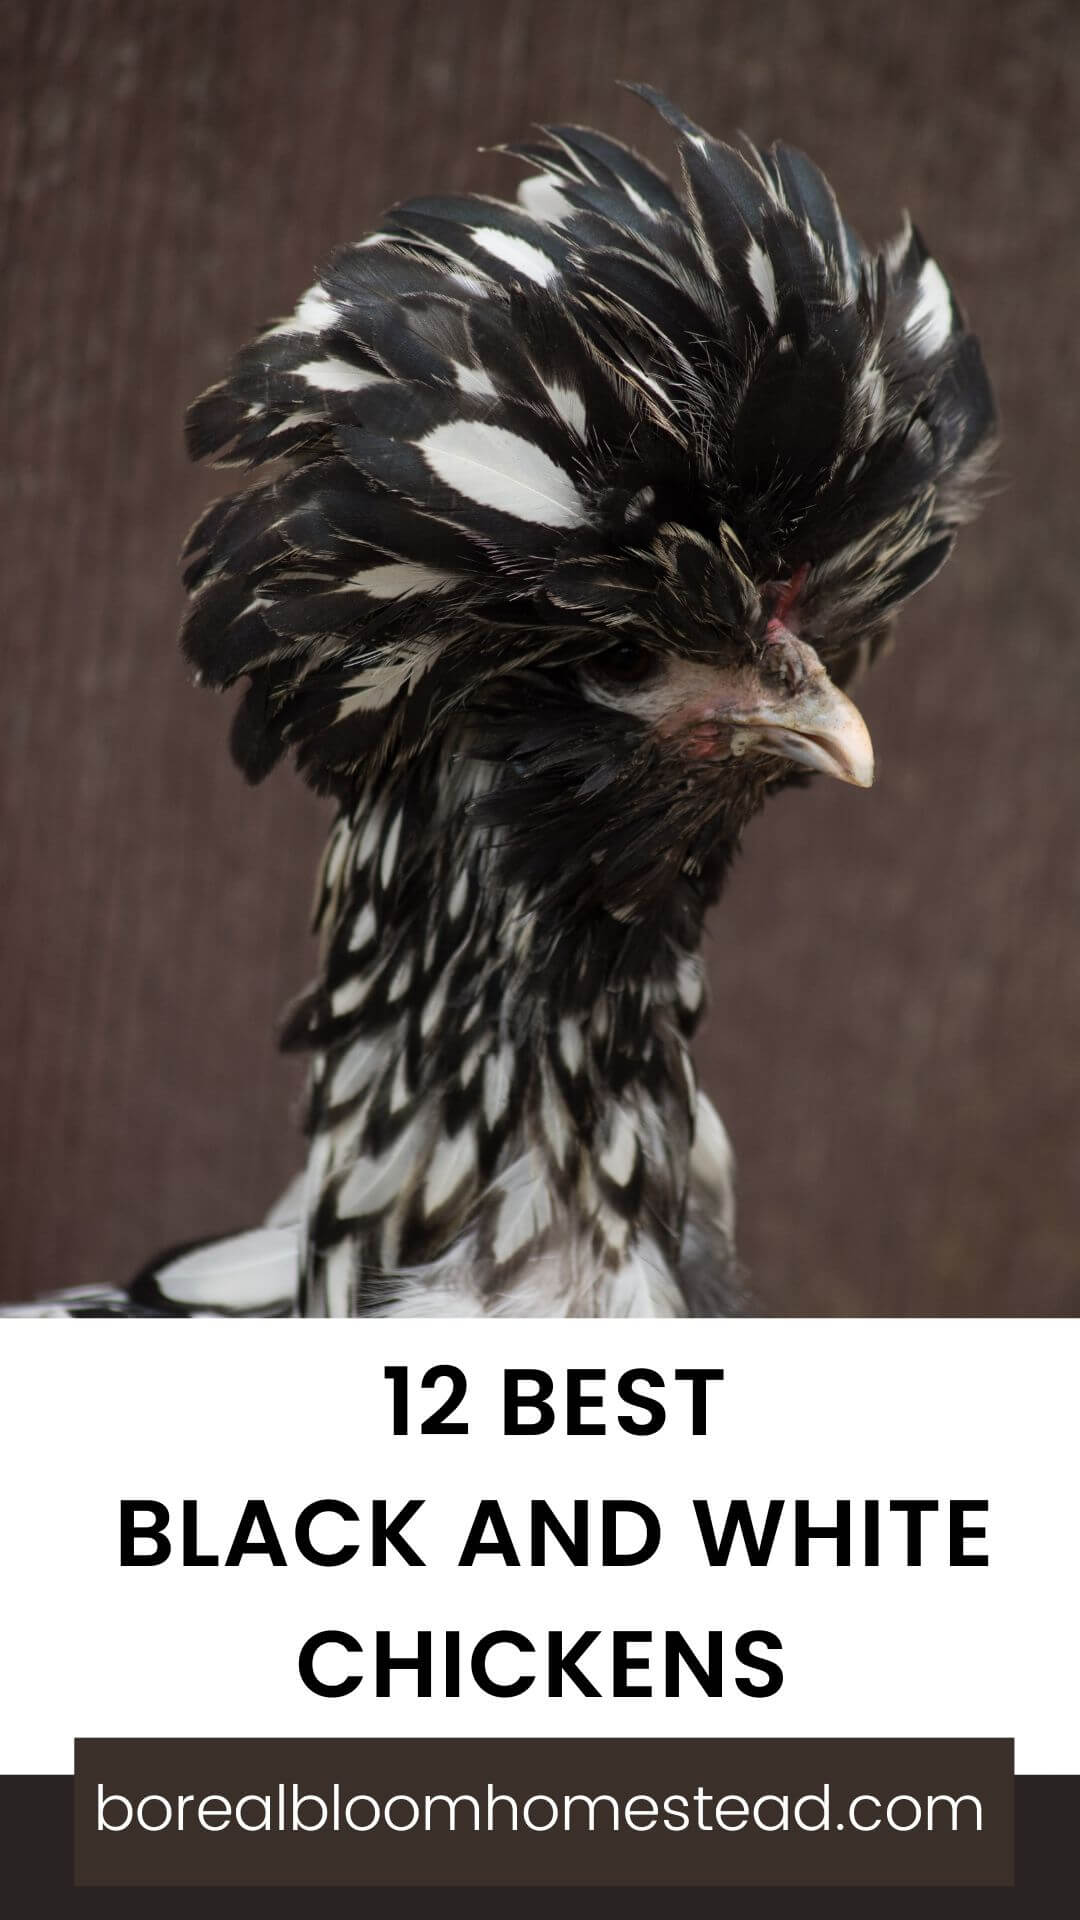 Silver laced polish hen with text overlay: 12 best black and white chickens.